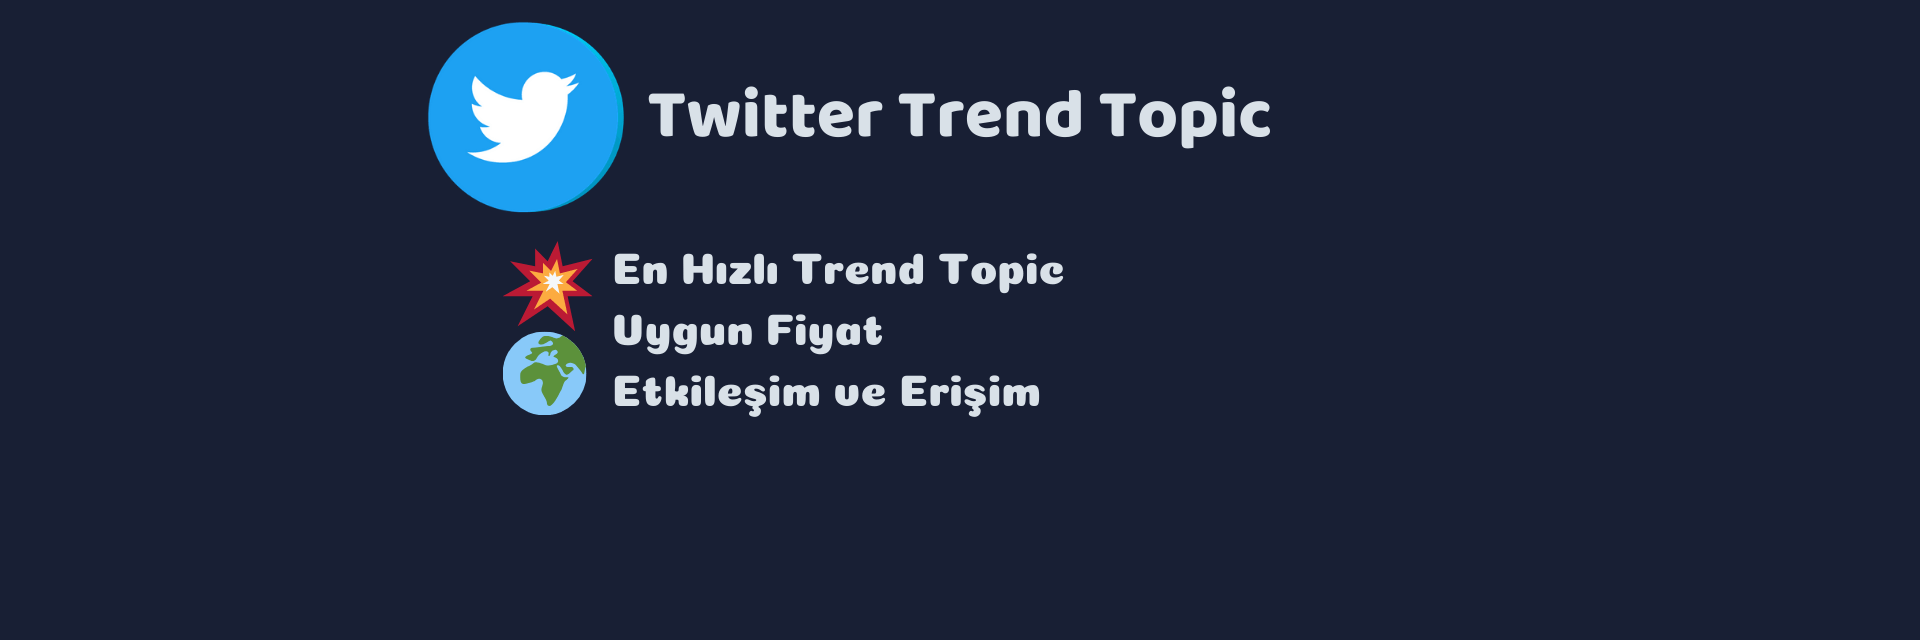 Twitter Trend Topic